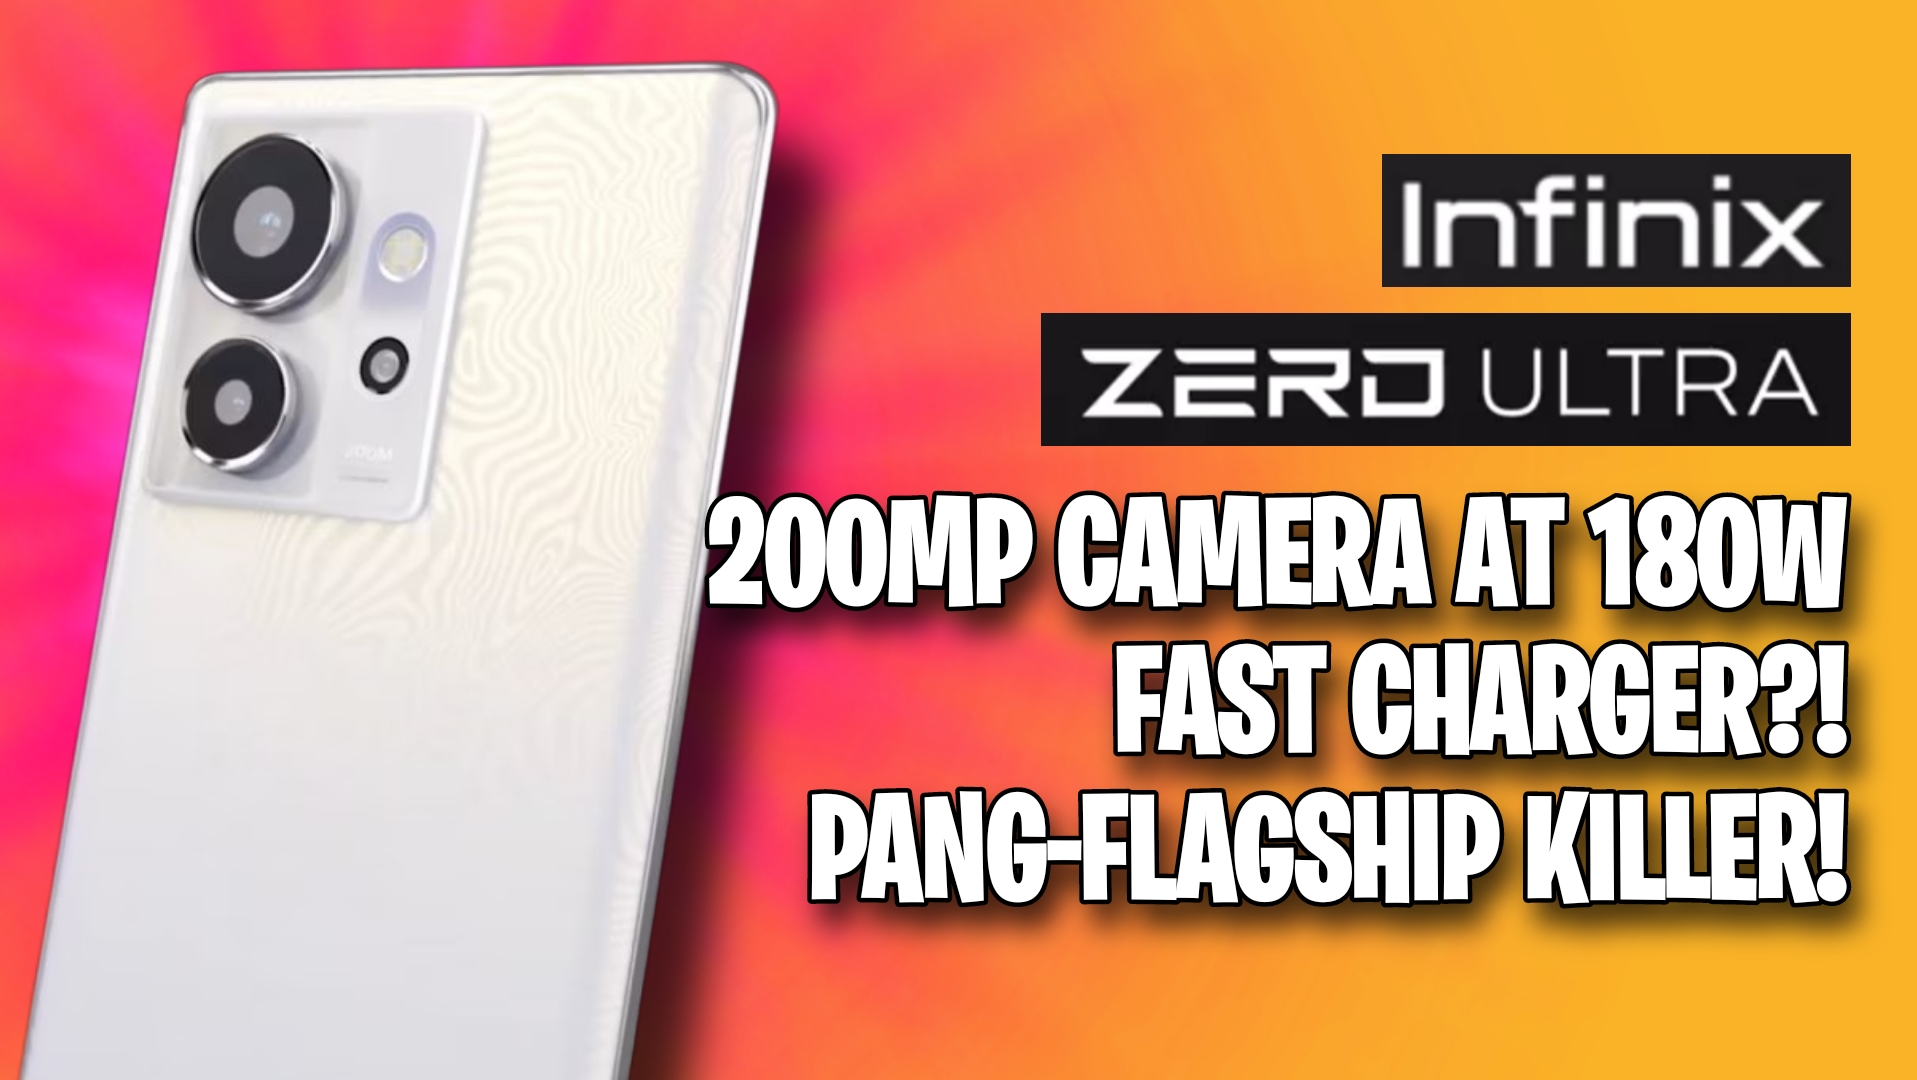 Infinix Zero Ultra: possibly the world's first phone with 180W fast charger - Unbox Diaries